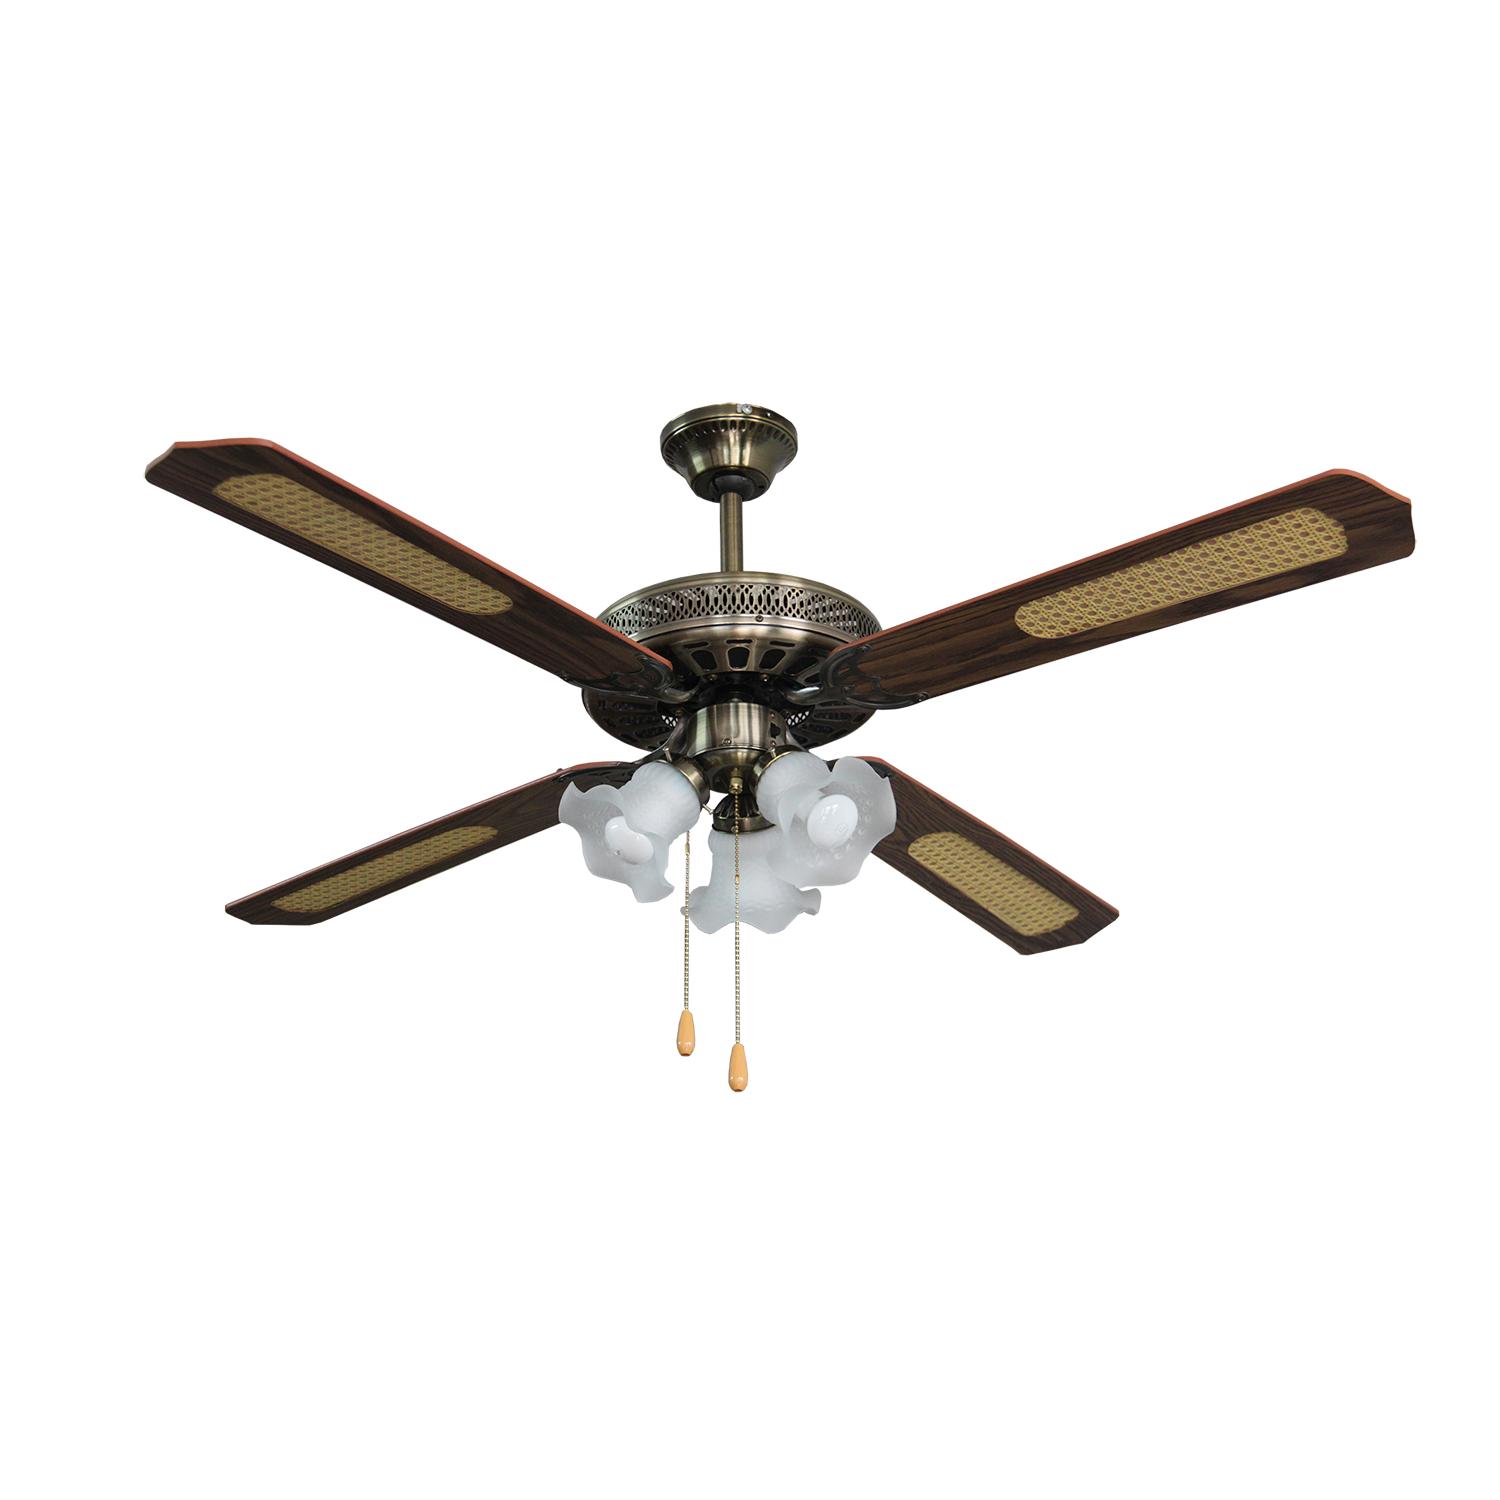 American Legacy 52 Ceiling Fan 4 Blades 3 Lights Rattan Design Alcf 6404 Bulb Not Included